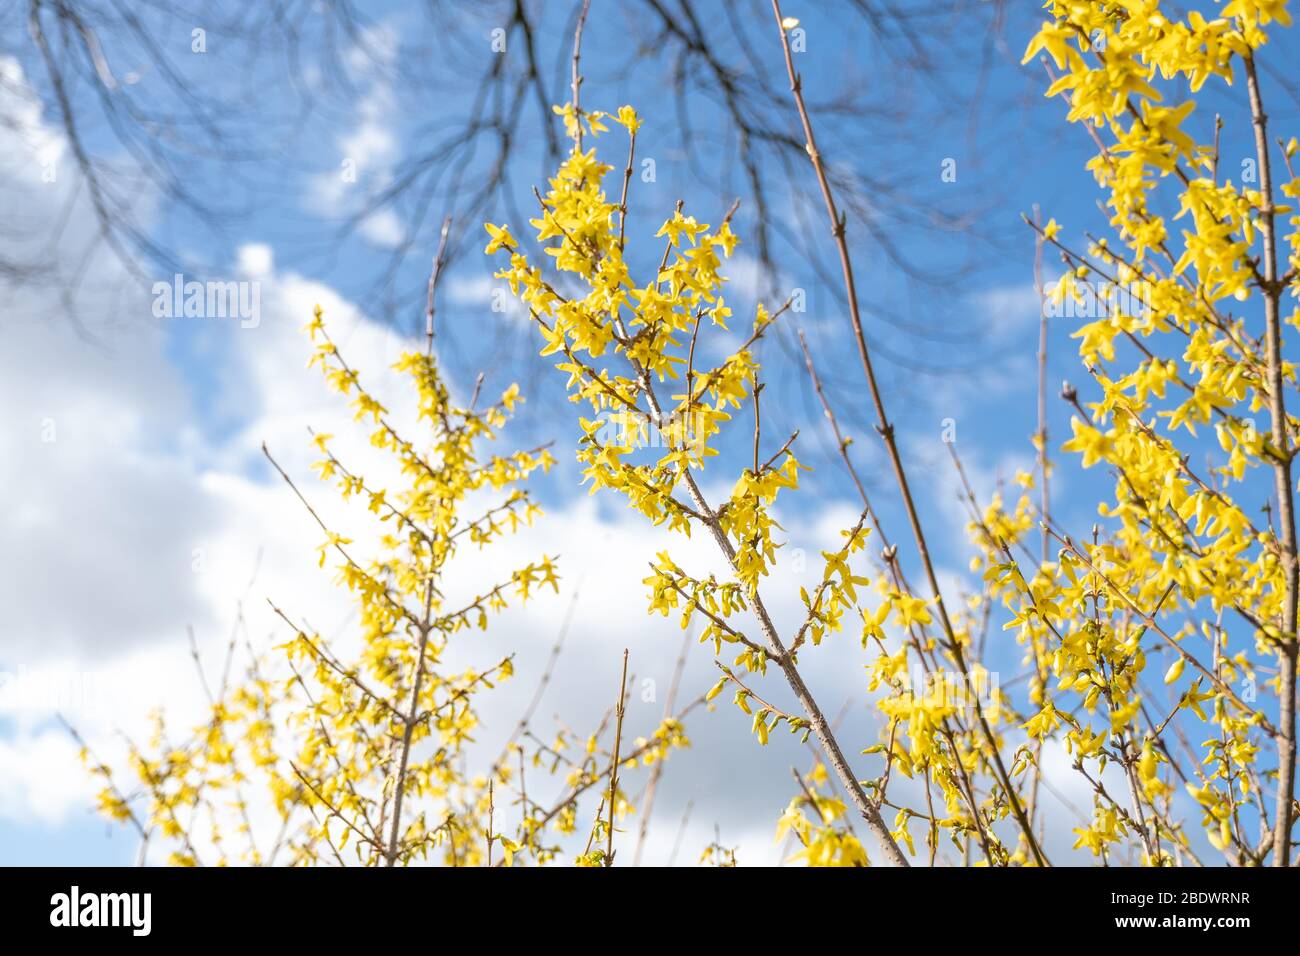 Spring floral Broom Cytisus 'Luna' Plant, beautiful fresh yellow flowers, isolated on blue sky background, selective focus. Stock Photo